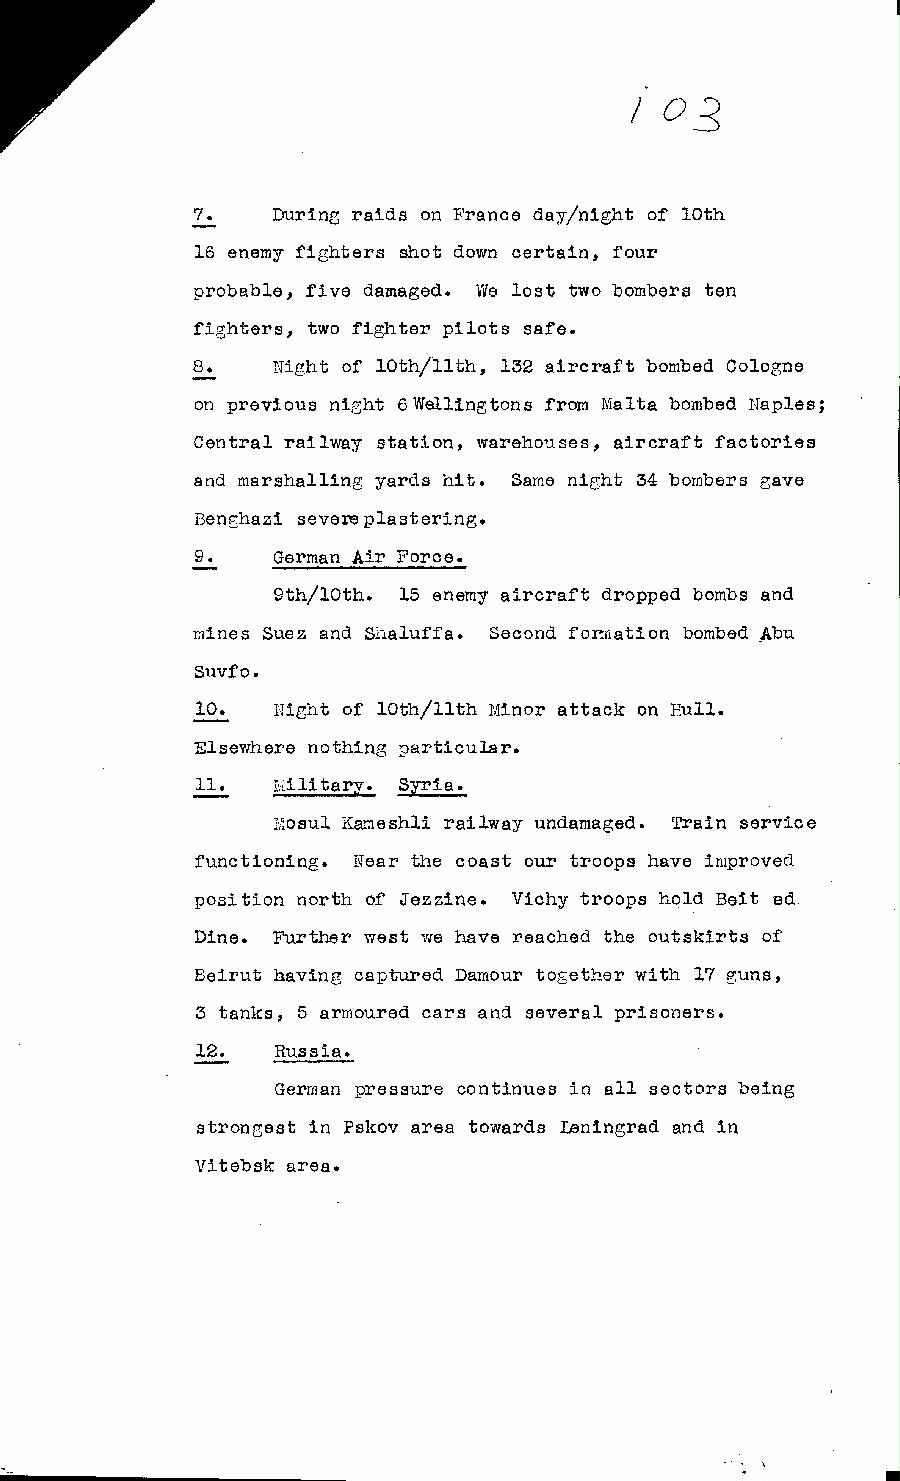 [a322i03.jpg] - Cont-Report on military situation 7/11/41